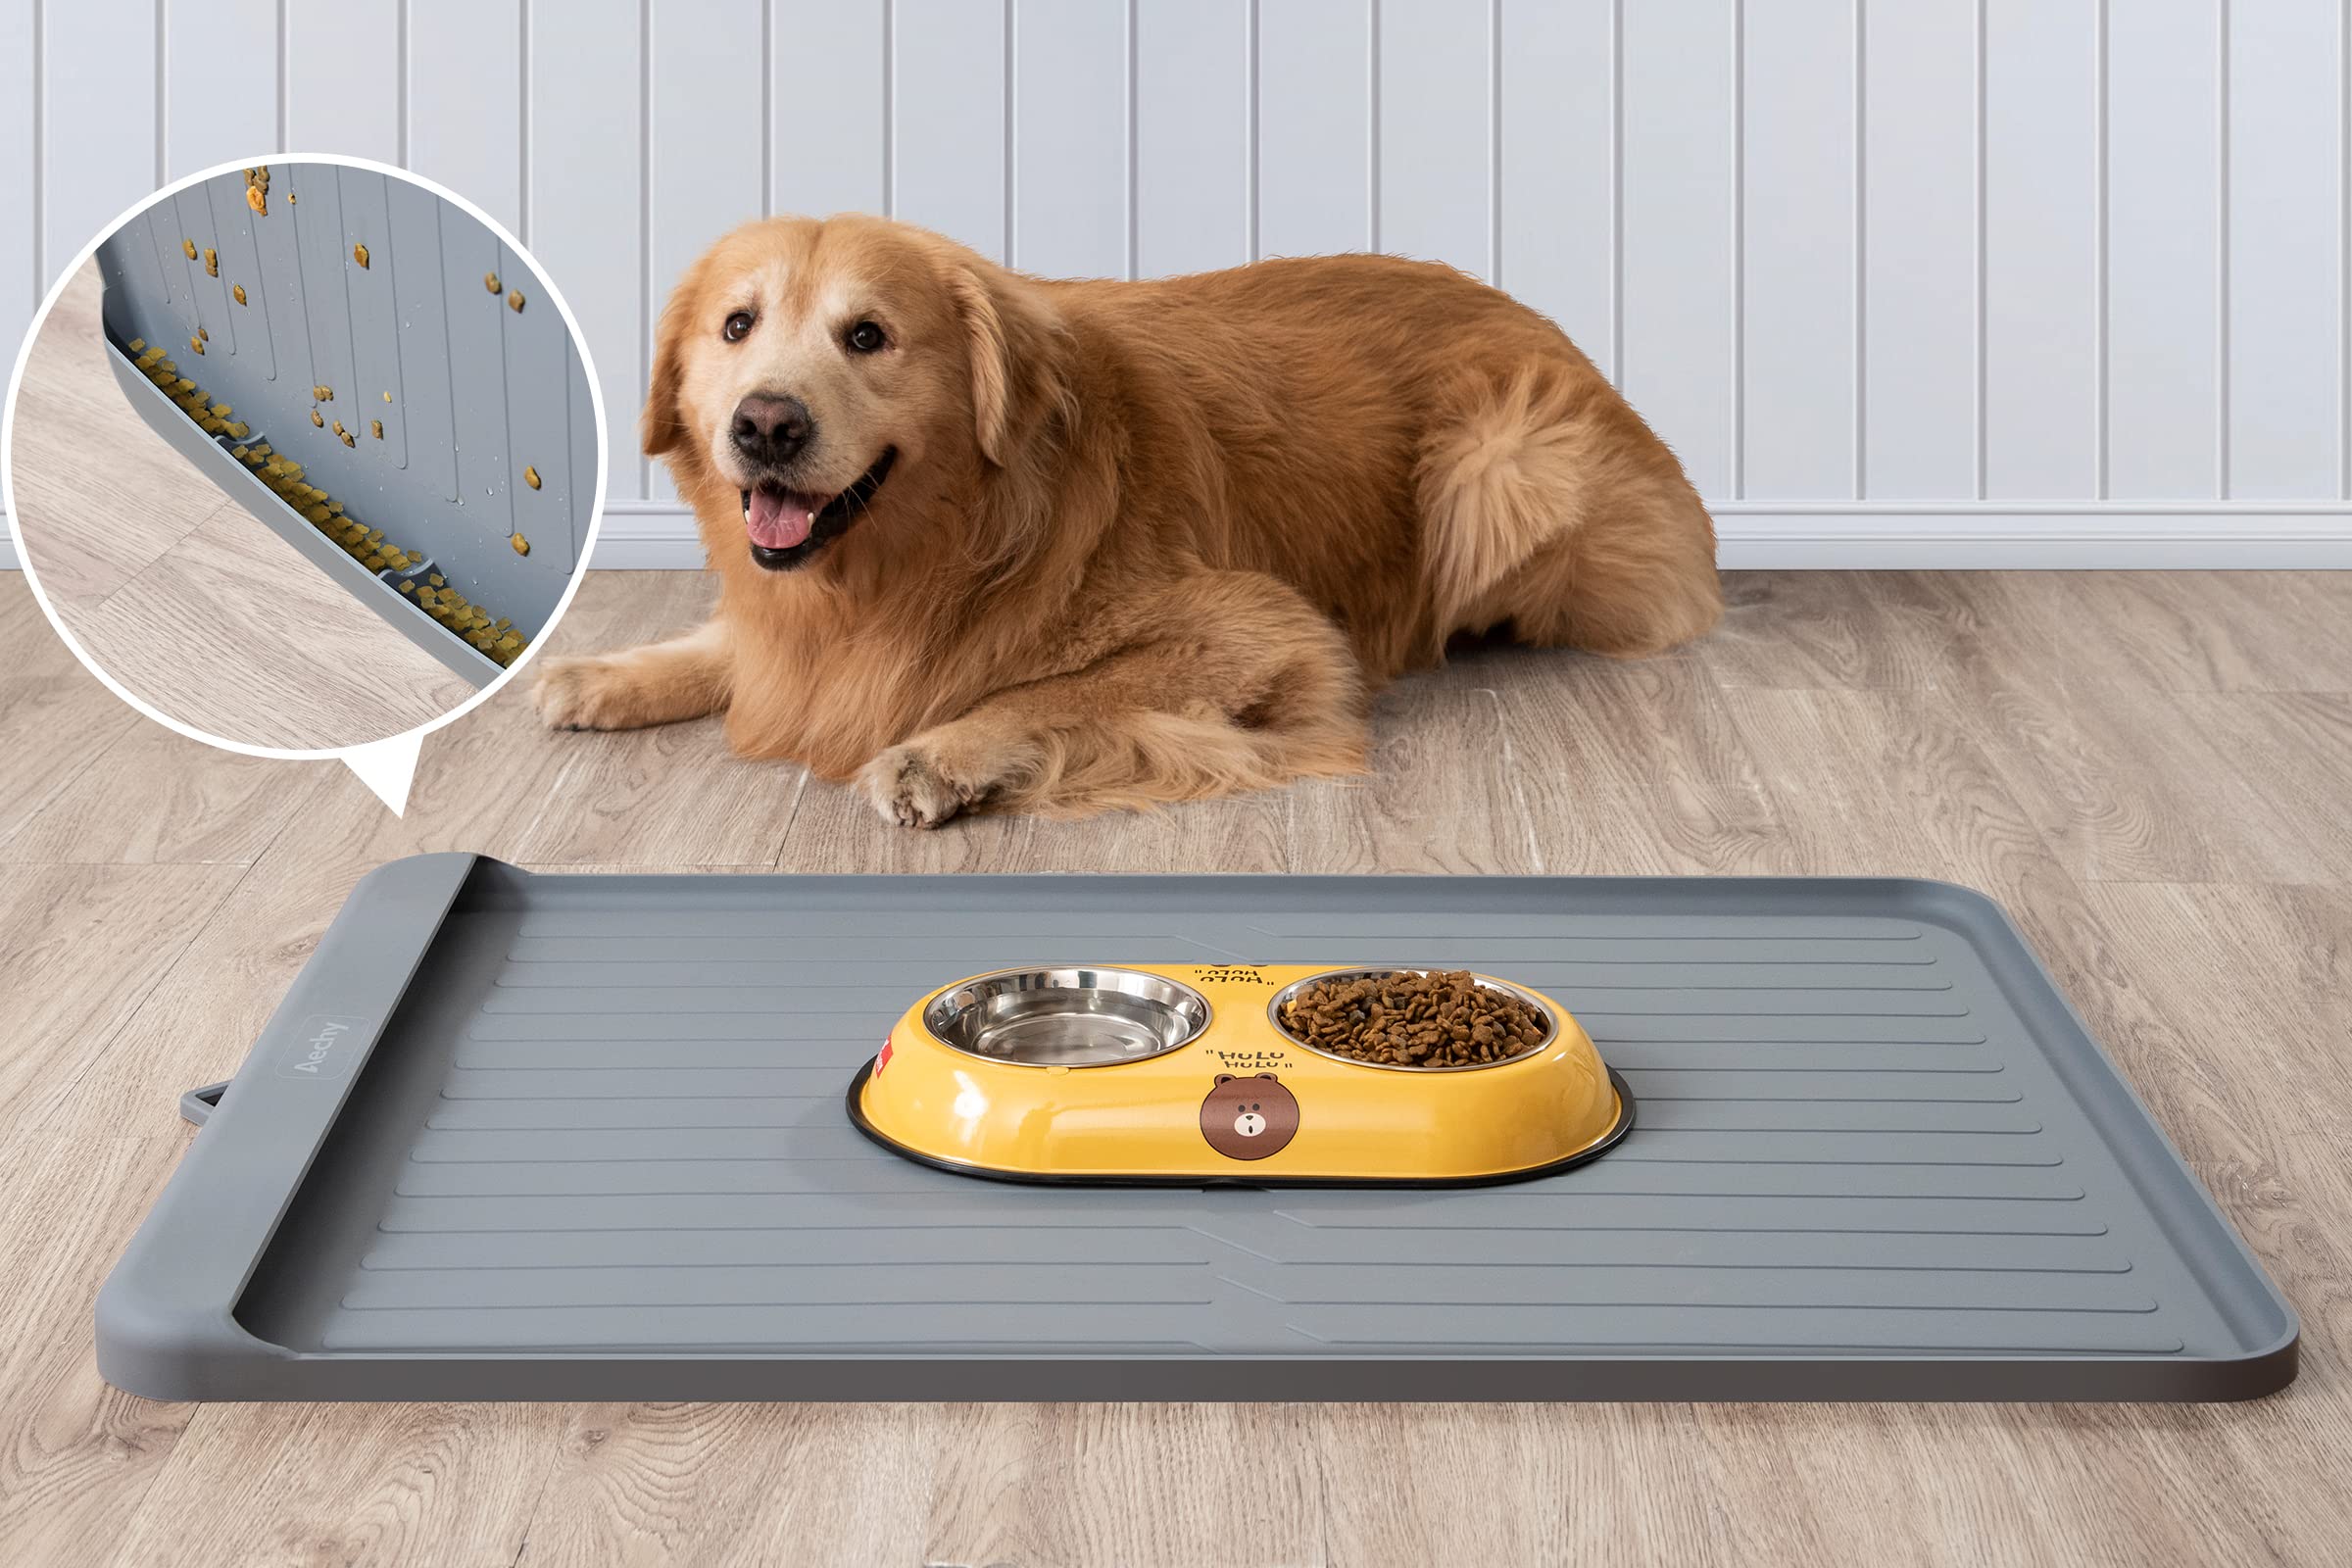 Dog Food Mat - Dog Feeding Mats for Food and Water - 36 x 24 Extra Large  Cat Dog Bowl Mat with Pocket for Catches Spill and Residue - Silicone Non